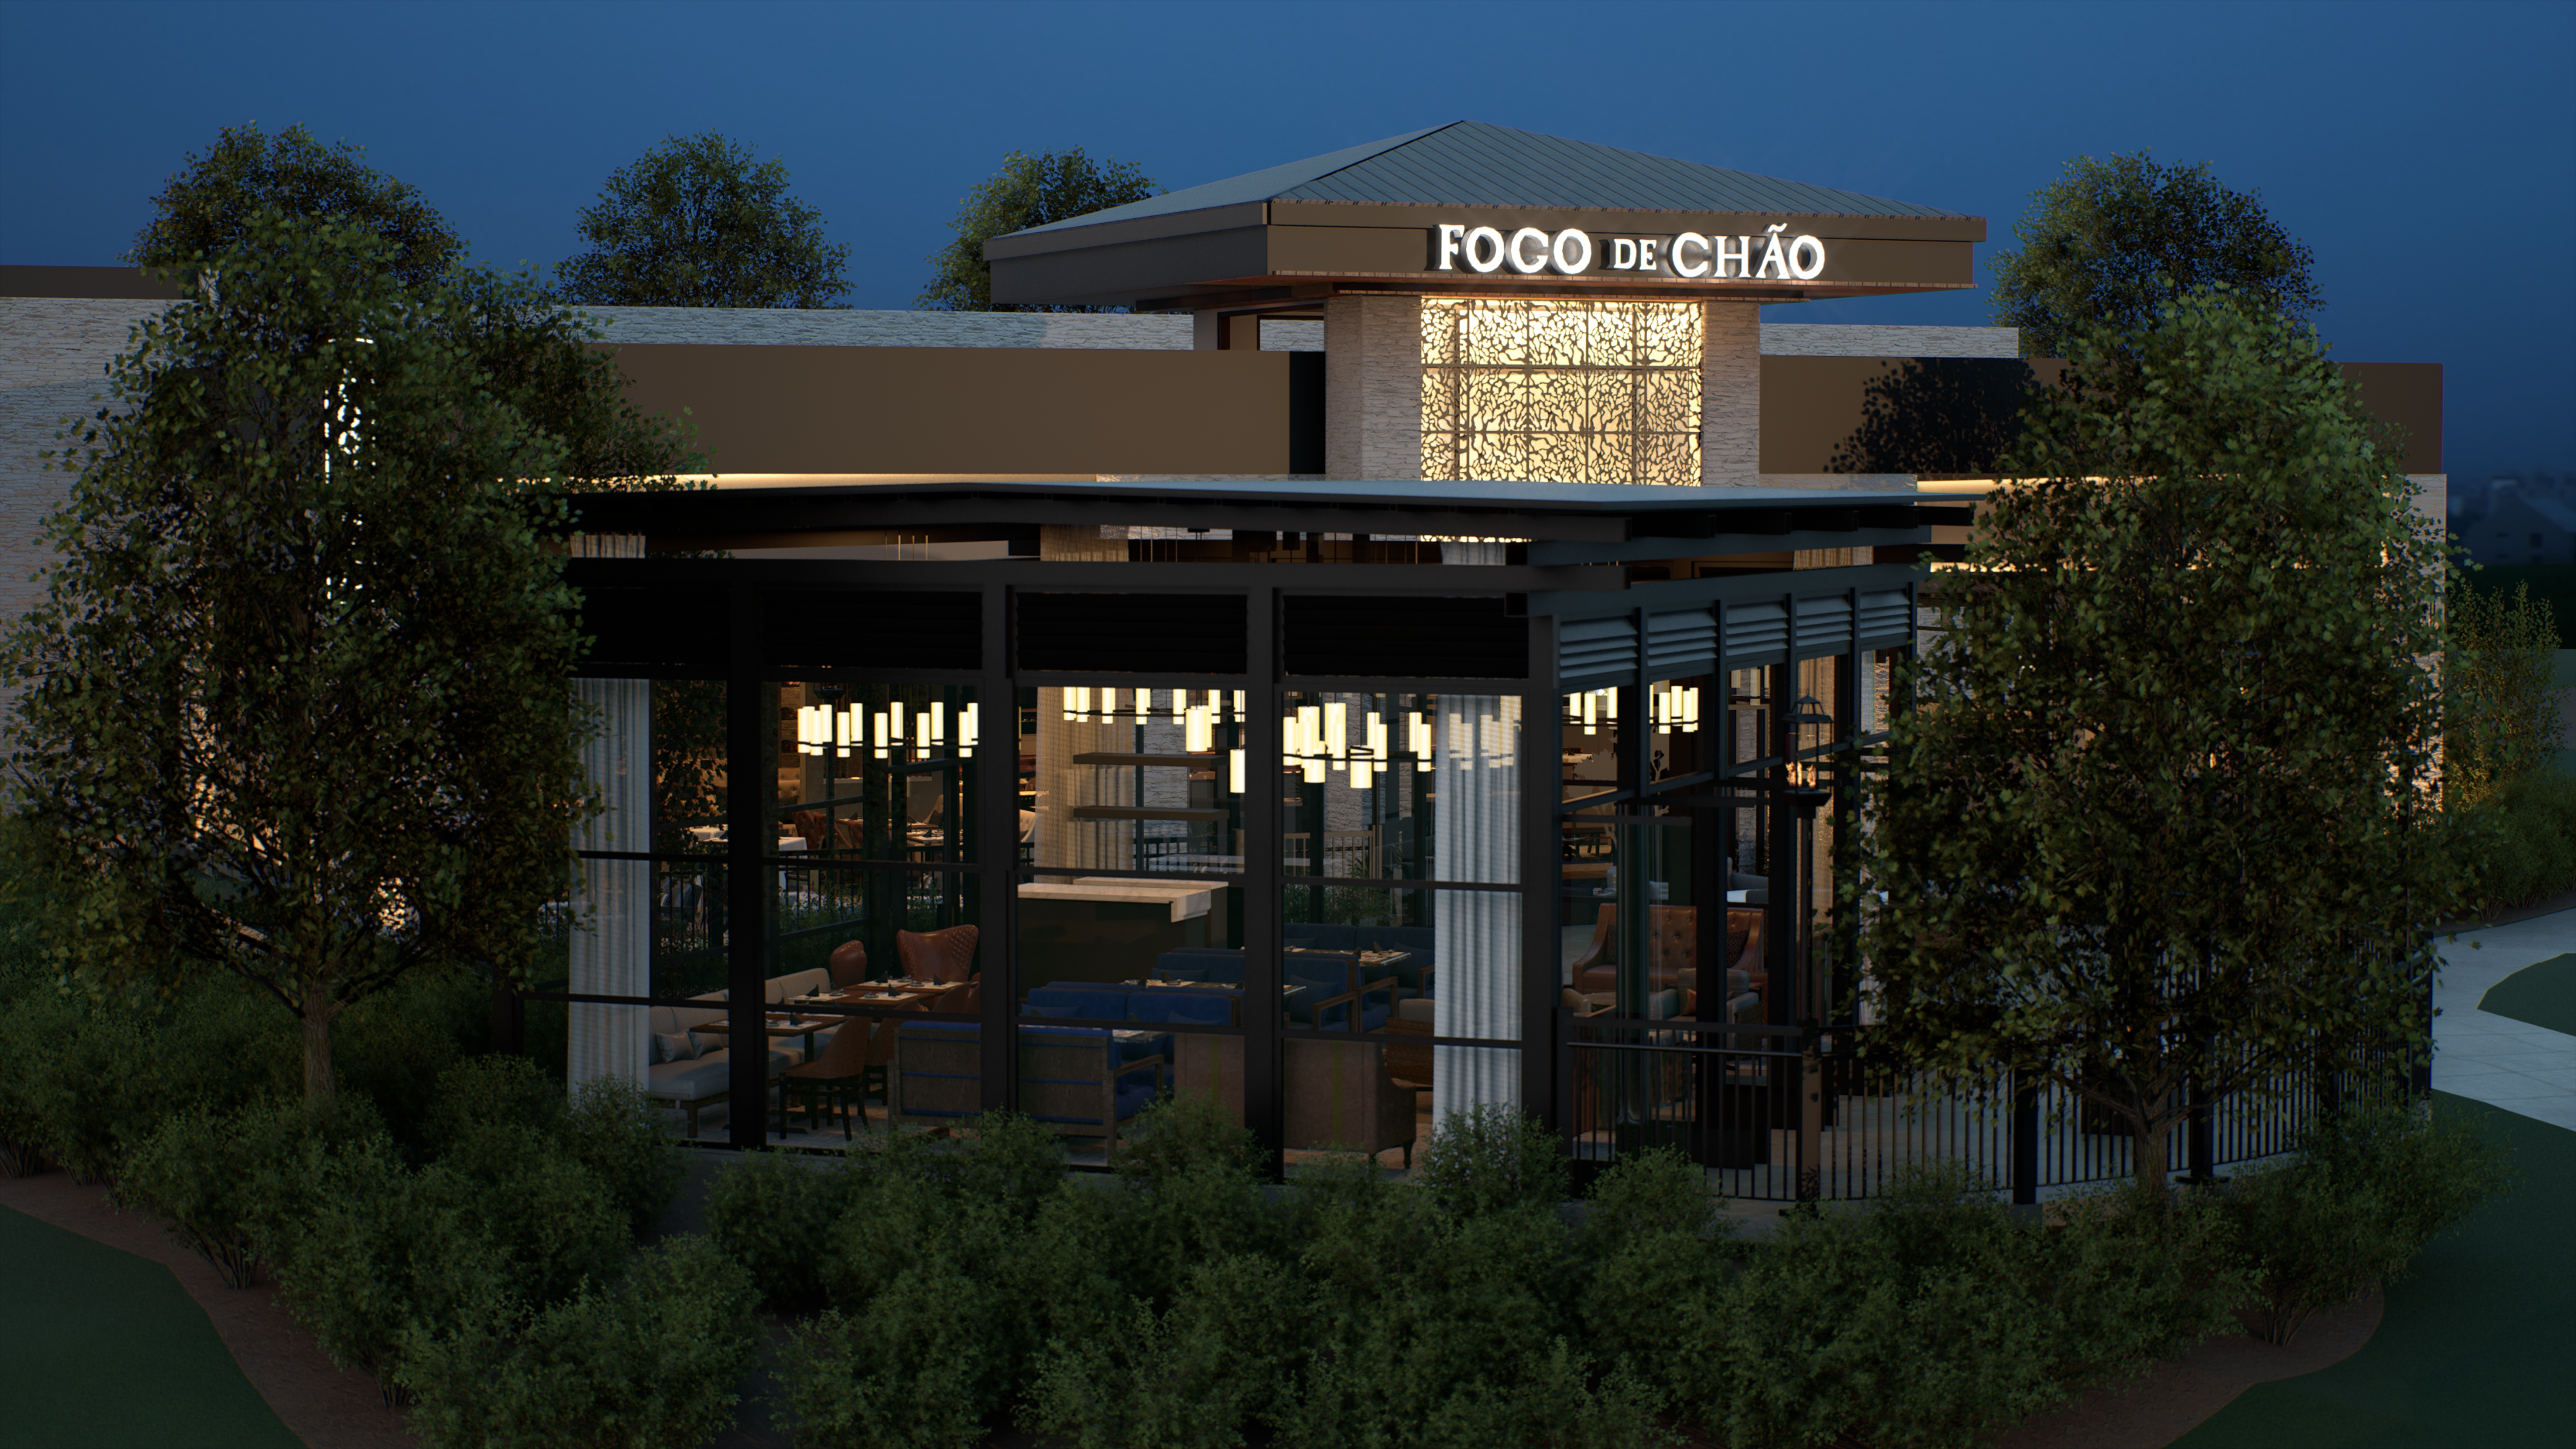 Fogo de Chão’s new location in Thousand Oaks is set to open later this year at The Lakes at Thousand Oaks.